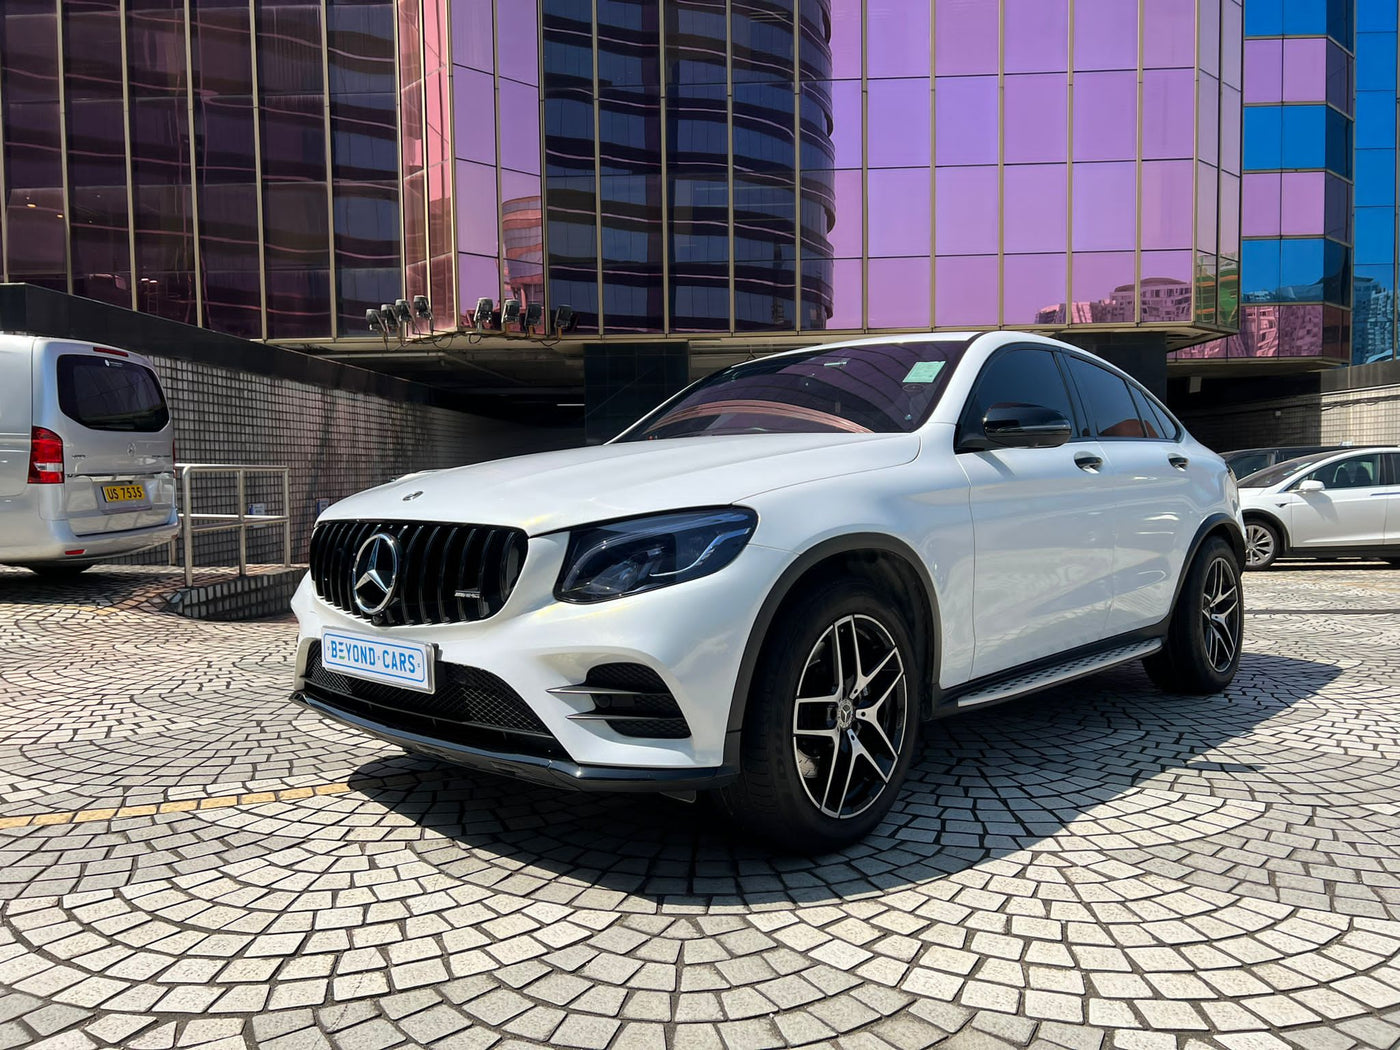 MERCEDES-BENZ GLC250 Coupe AMG 2018